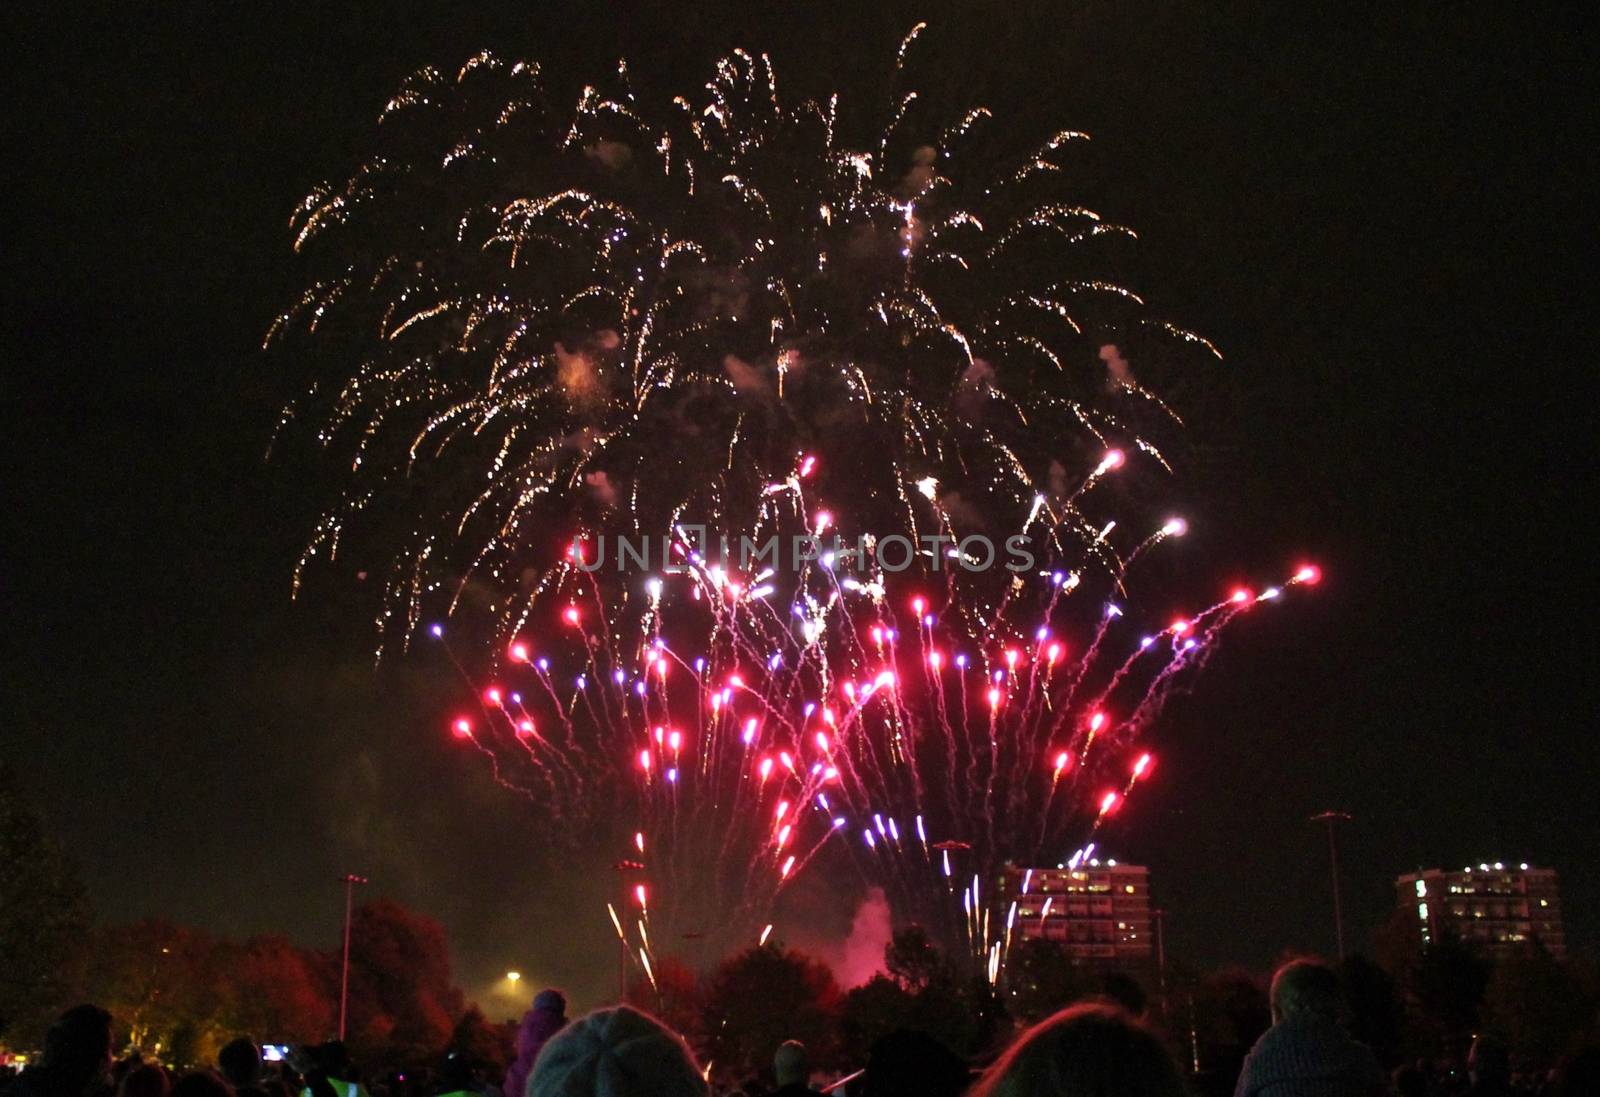 Fireworks light up the sky with dazzling display New years eve event 